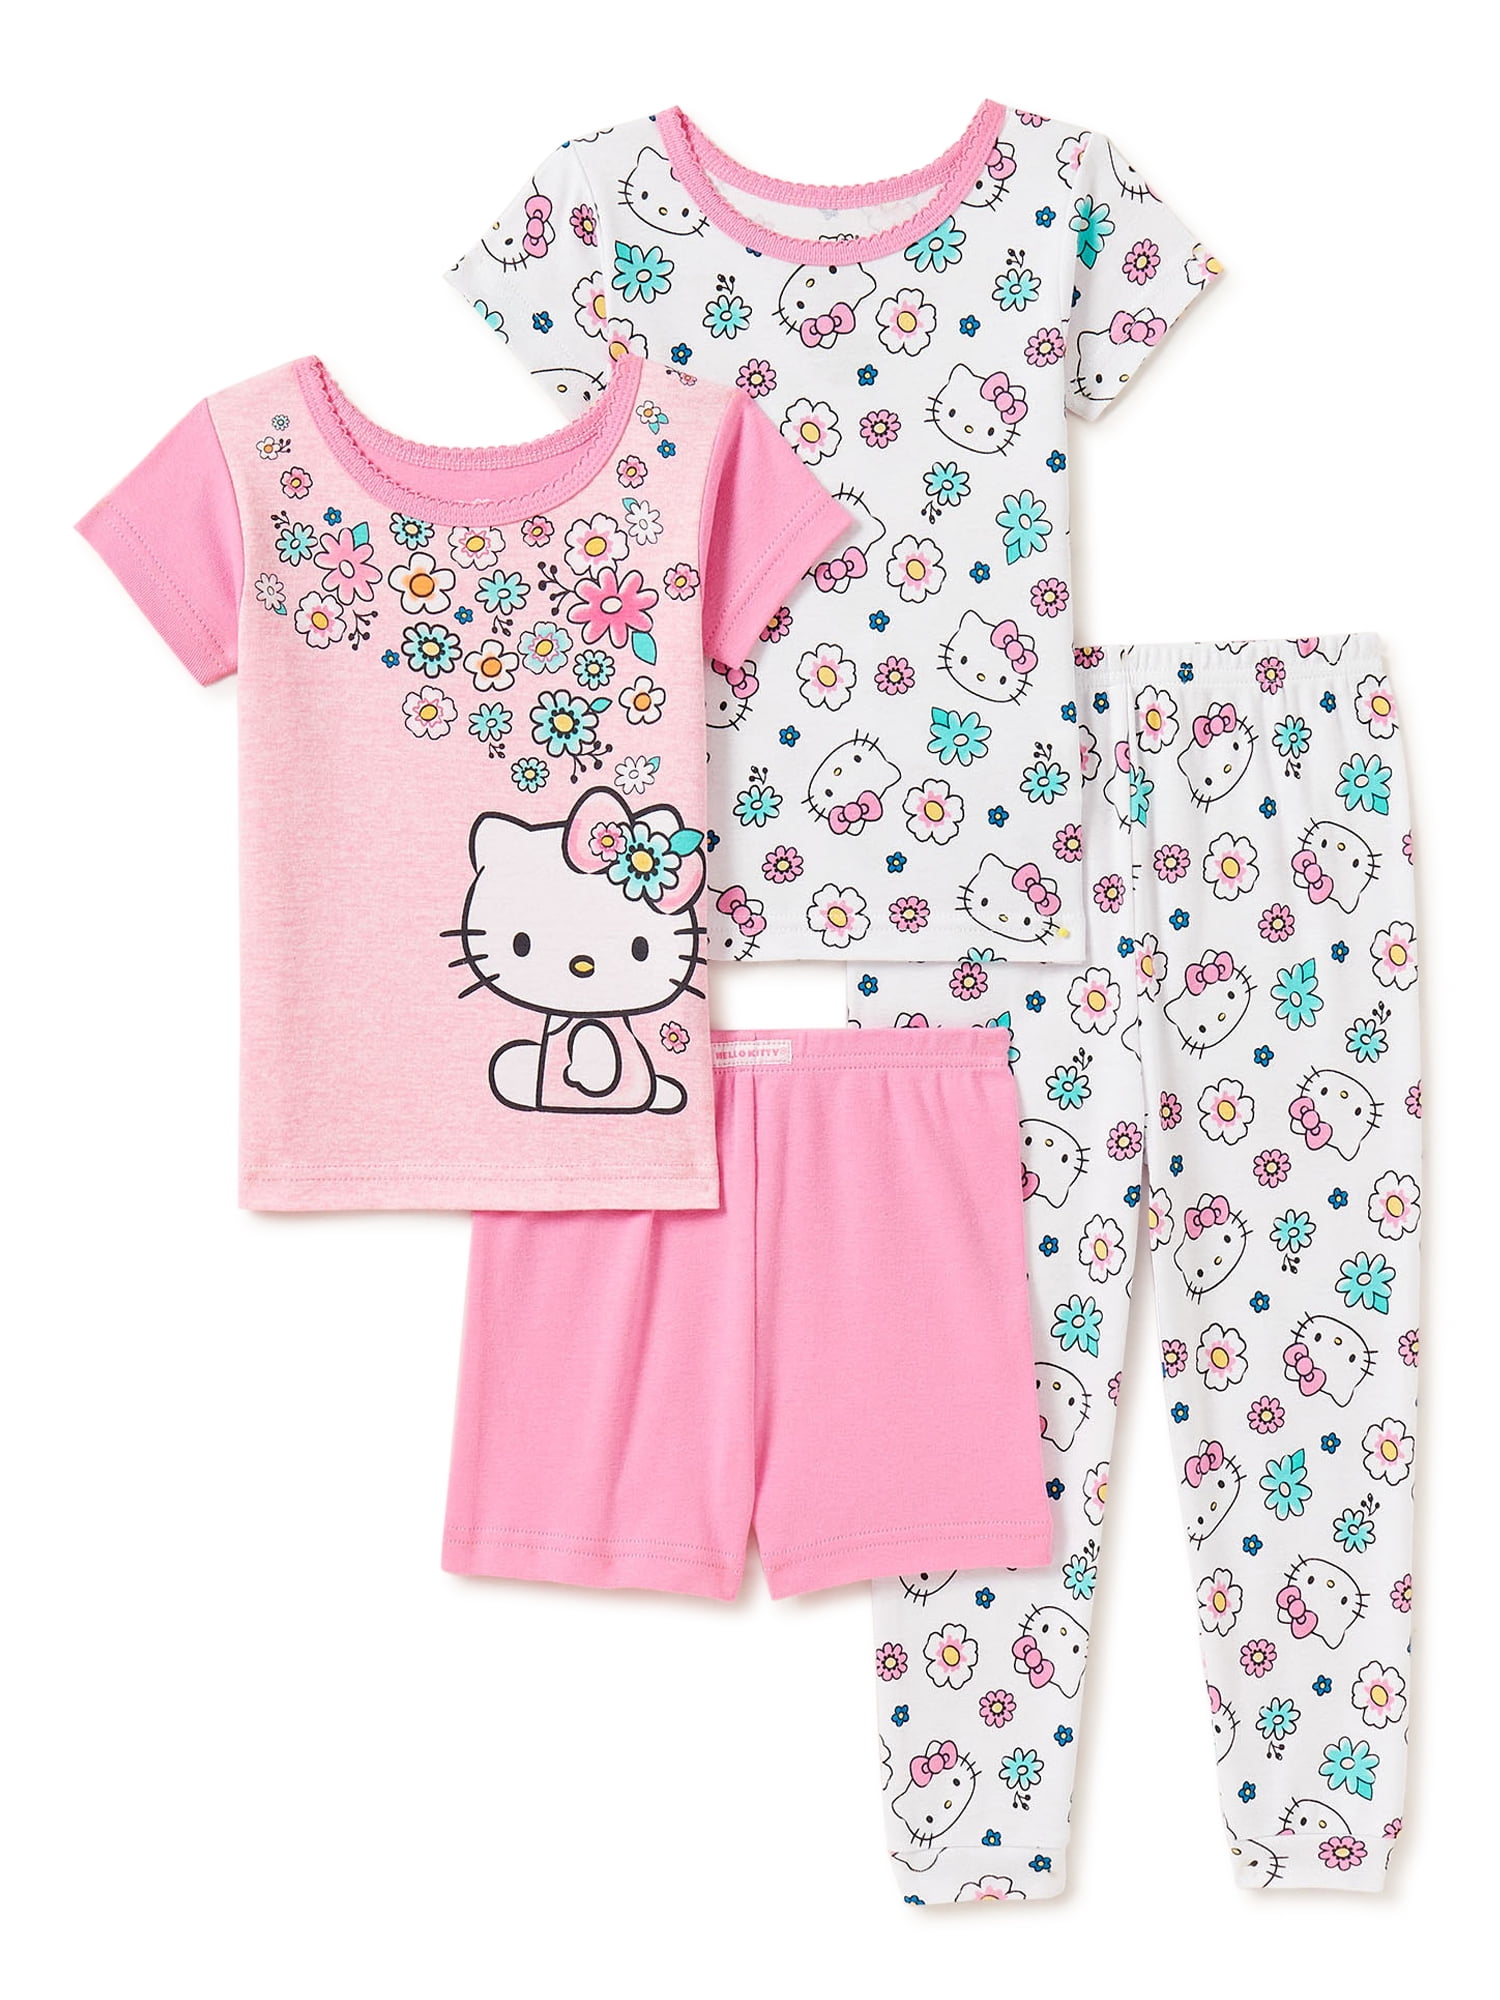 HELLO KITTY PINK NIGHTIE WITH A "HELLO KITTY" ON FRONT & SHORT SLEEVES BNWT 